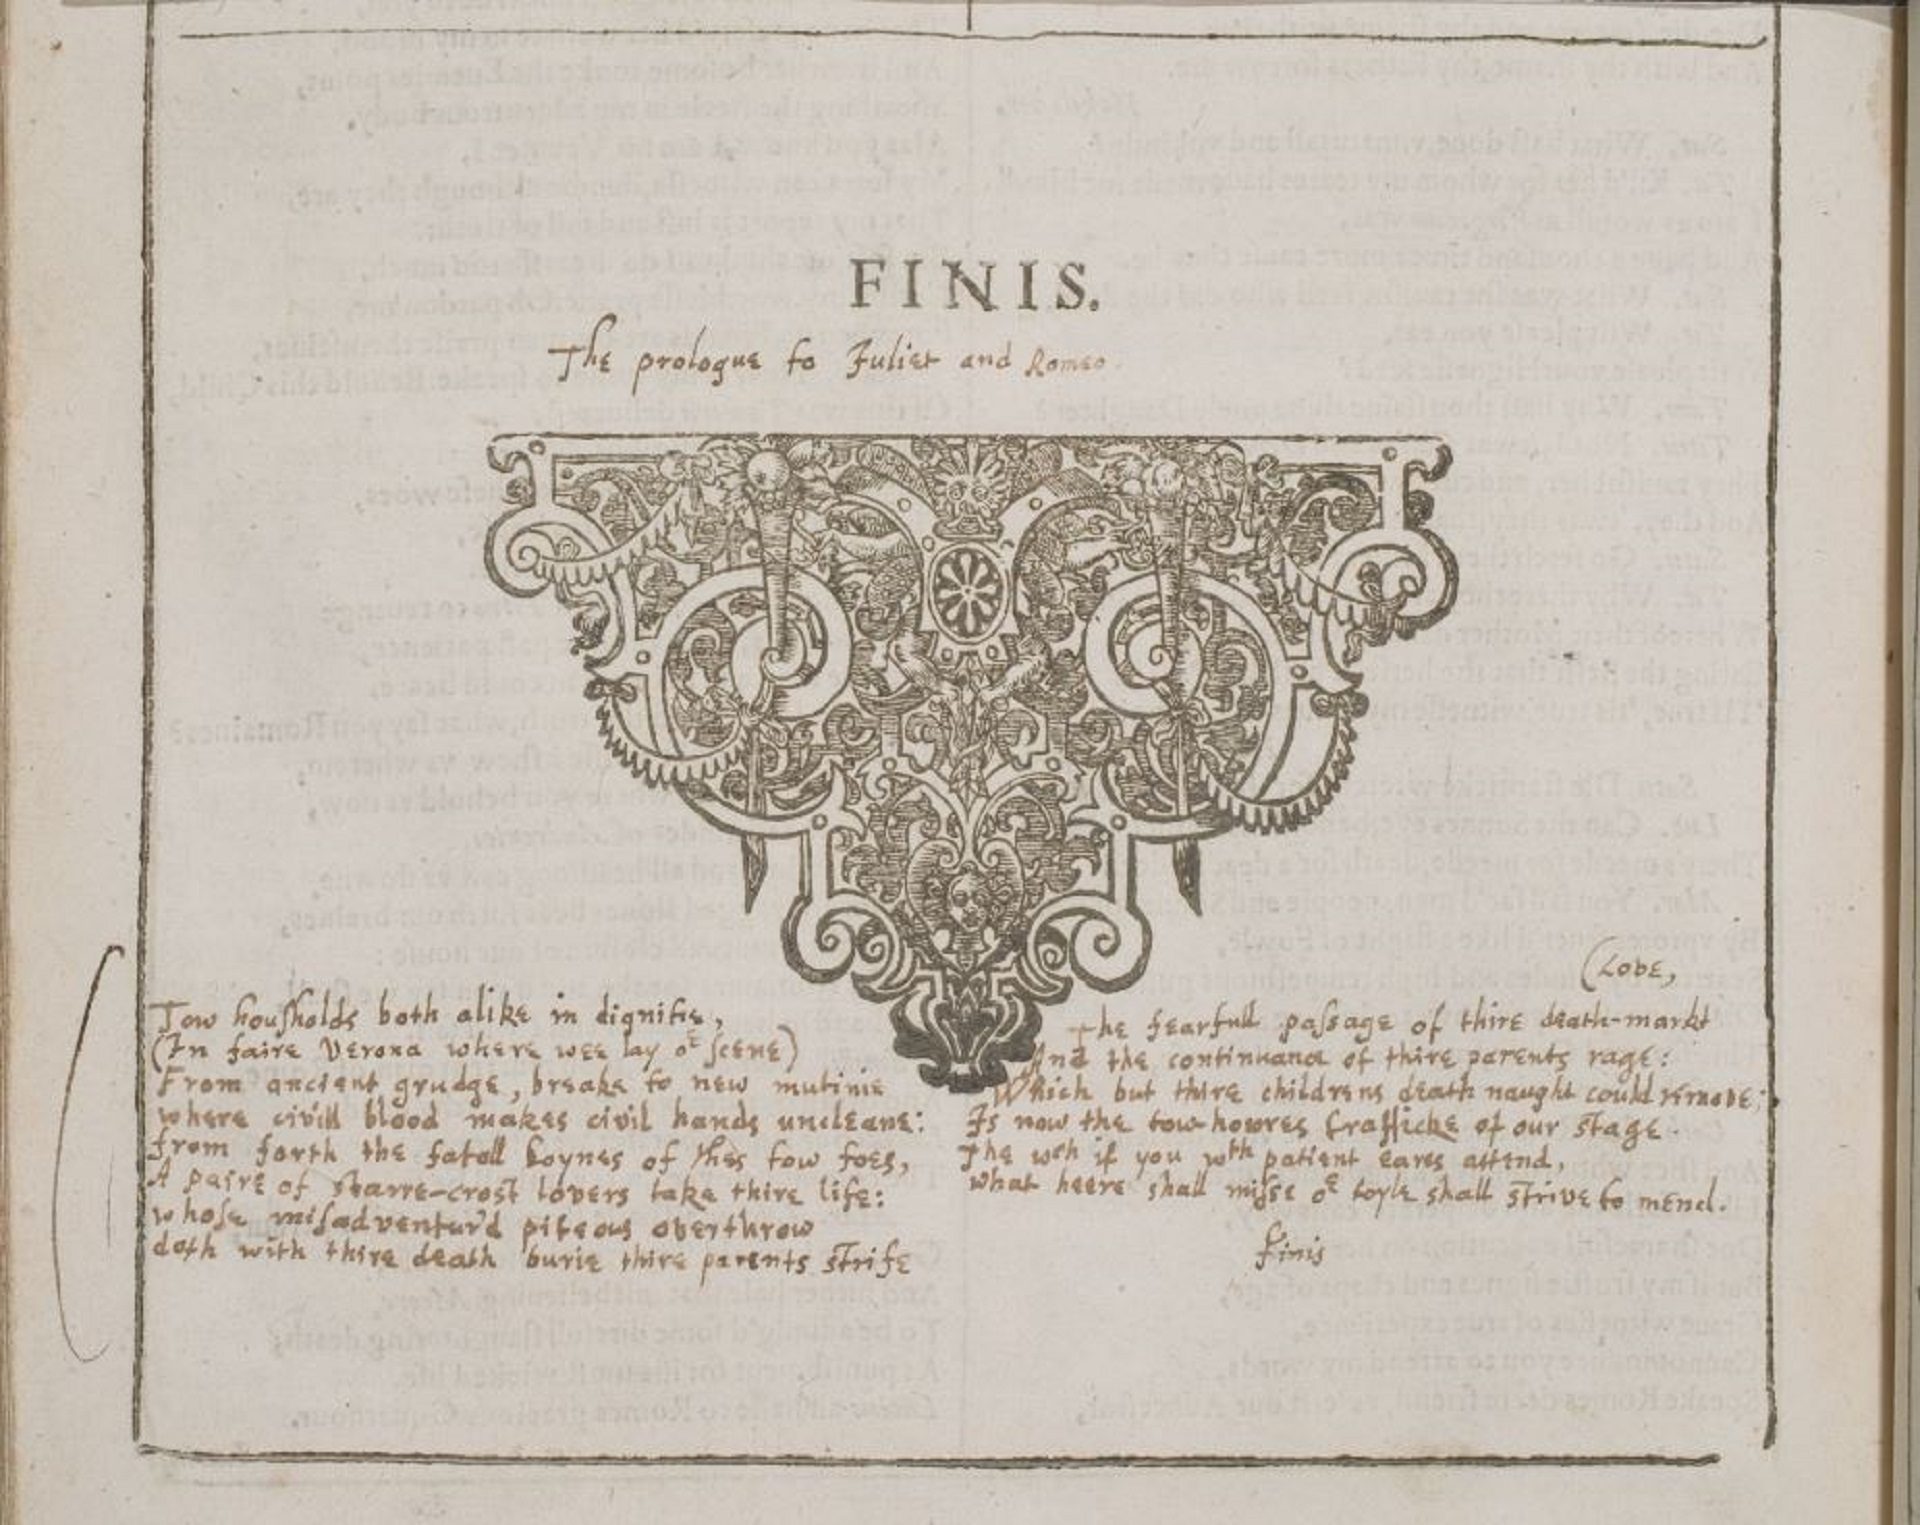 A copy of a nearly 400-year old manuscript of plays by William Shakespeare in the Rare Book Department of the Free Library was found to have notes scribbled in the margins written by 17th century poet who wrote ‘Paradise Lost,’ John Milton. This image features a prologue to Romeo and Juliet in John Milton’s hand.